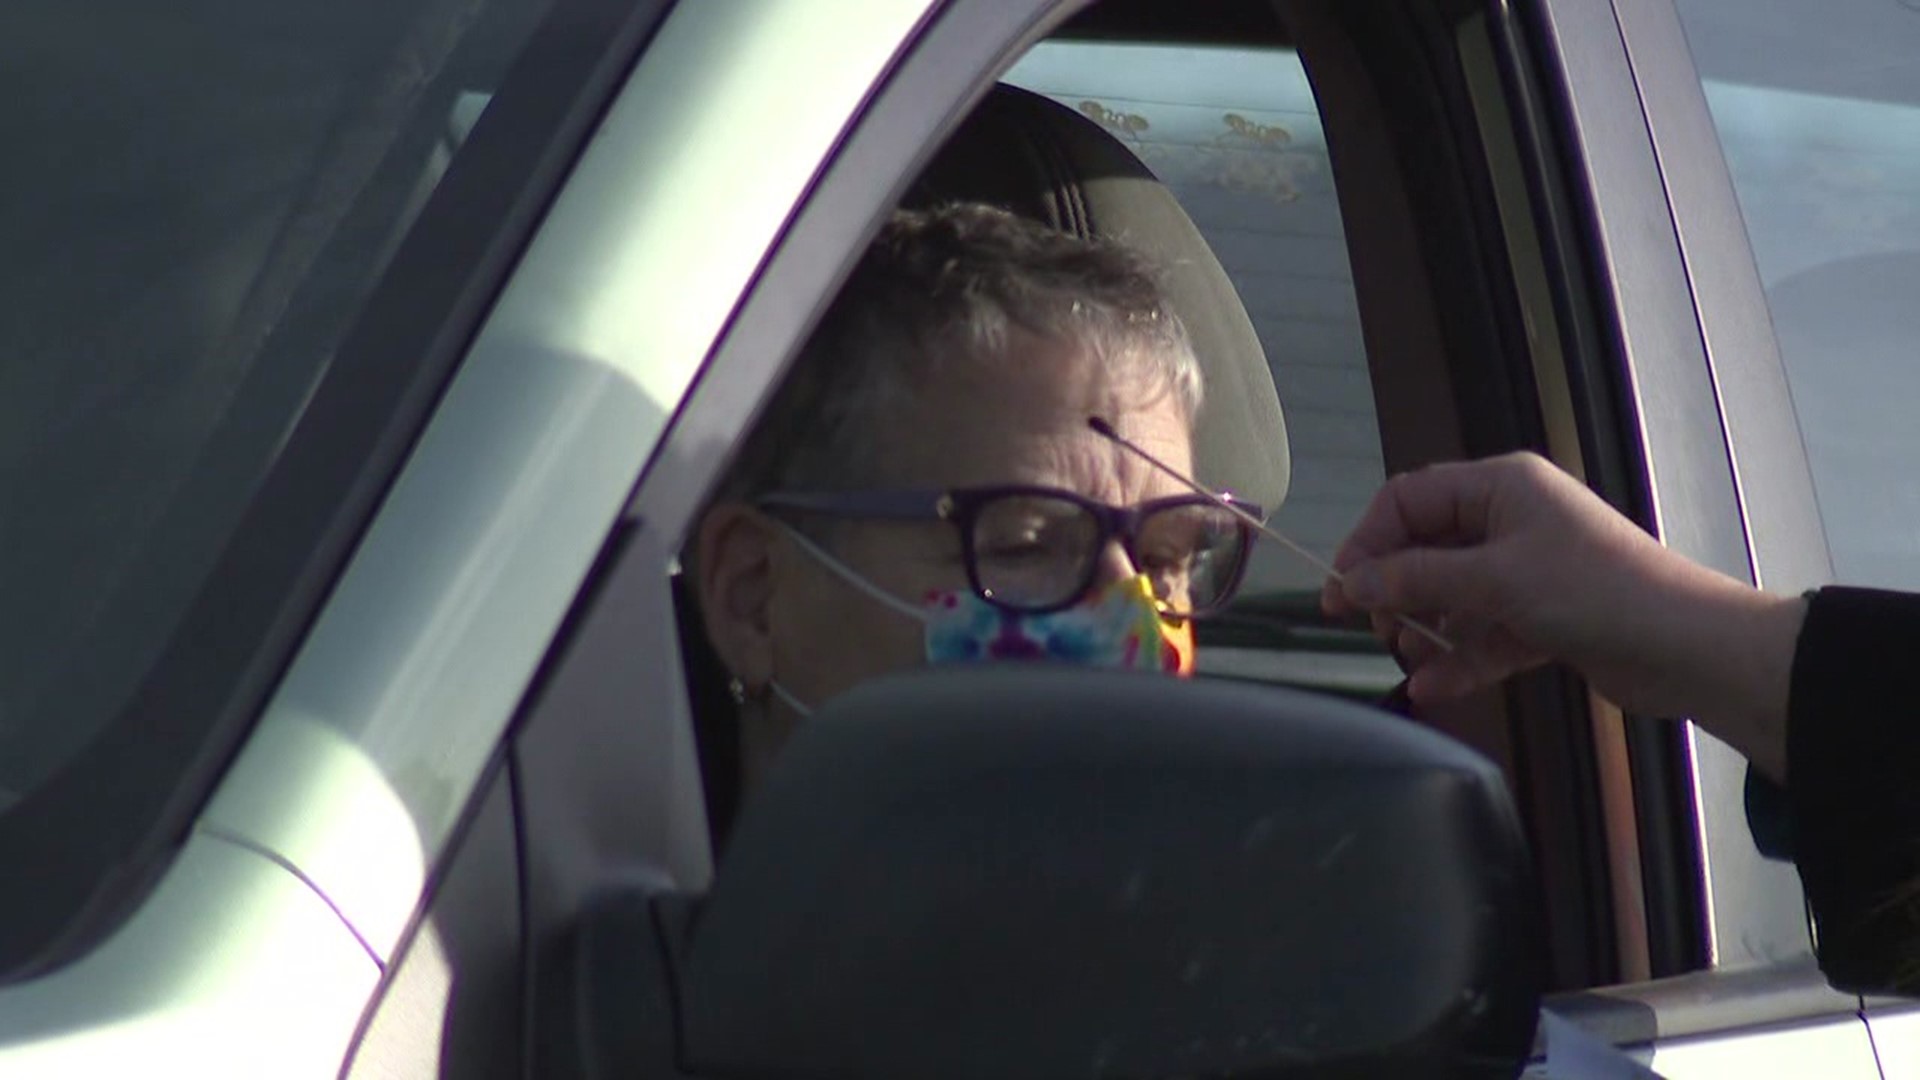 Drive-thru ashes done differently on this Ash Wednesday | wnep.com